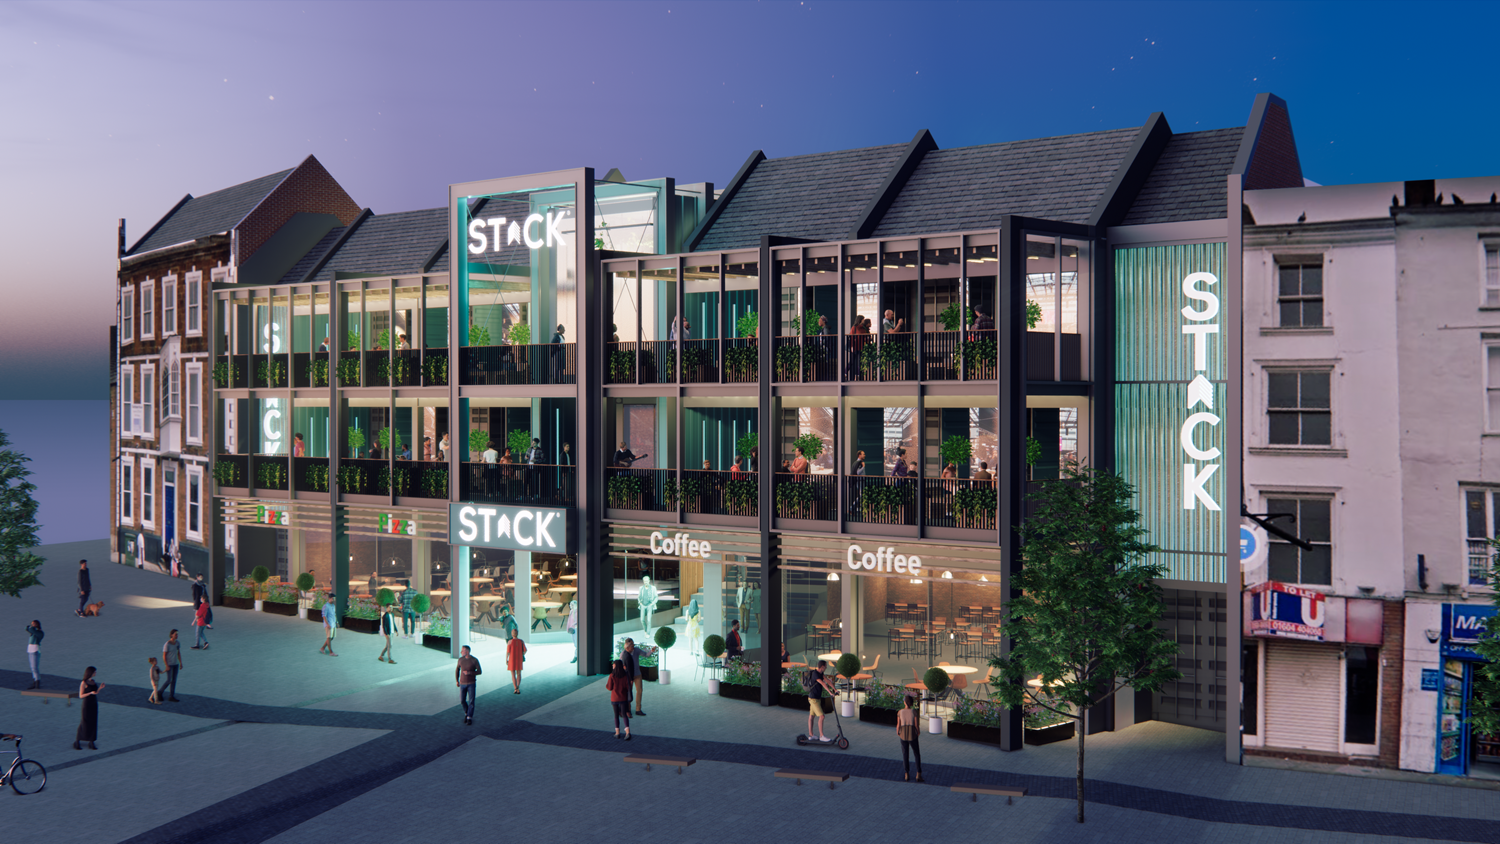 PLANS FOR STACK NORTHAMPTON GIVEN THE GREEN LIGHT